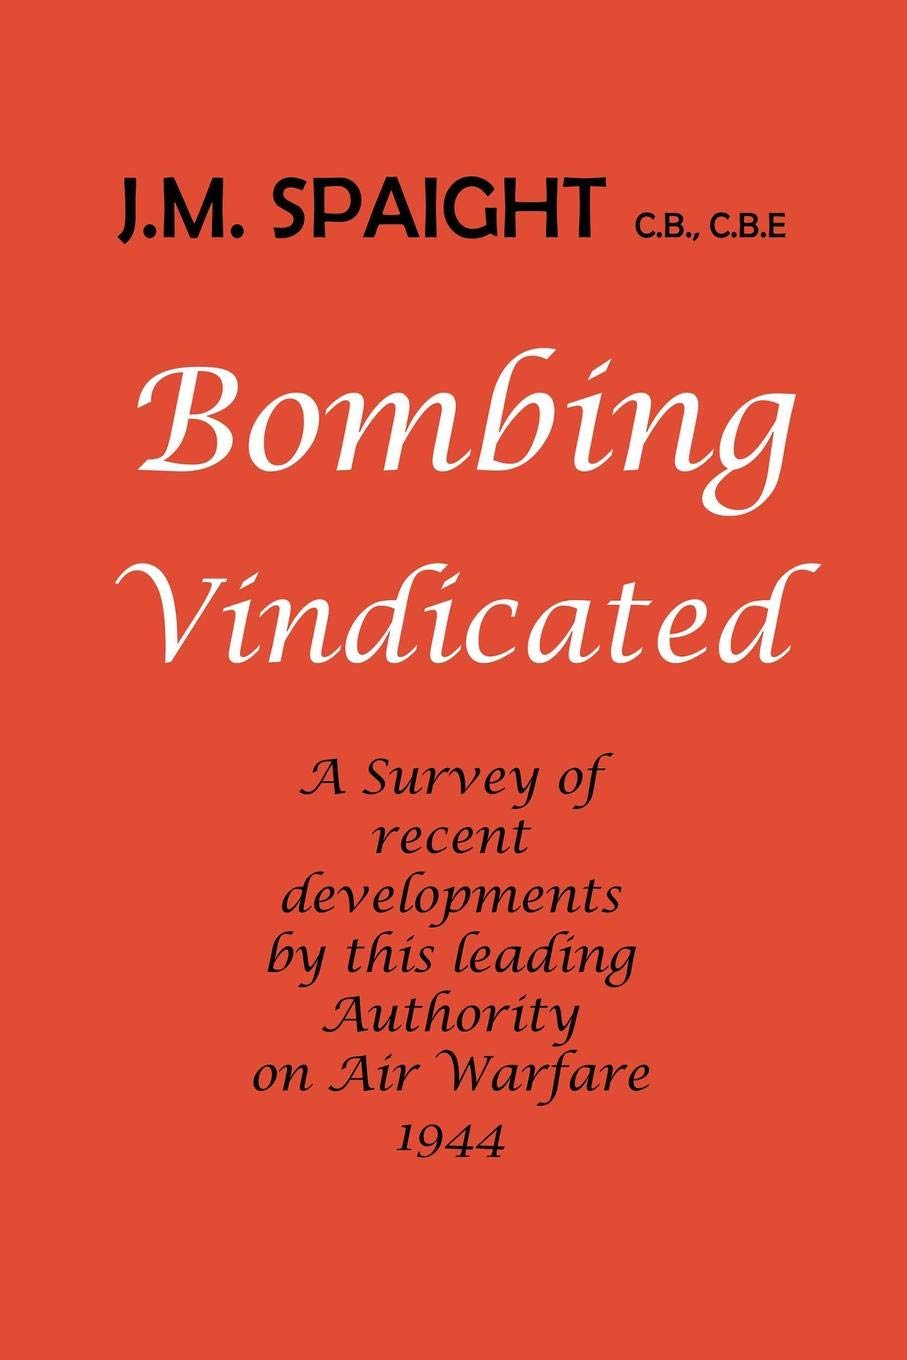 Bombing Vindicated (1944) by J. M. Spaight